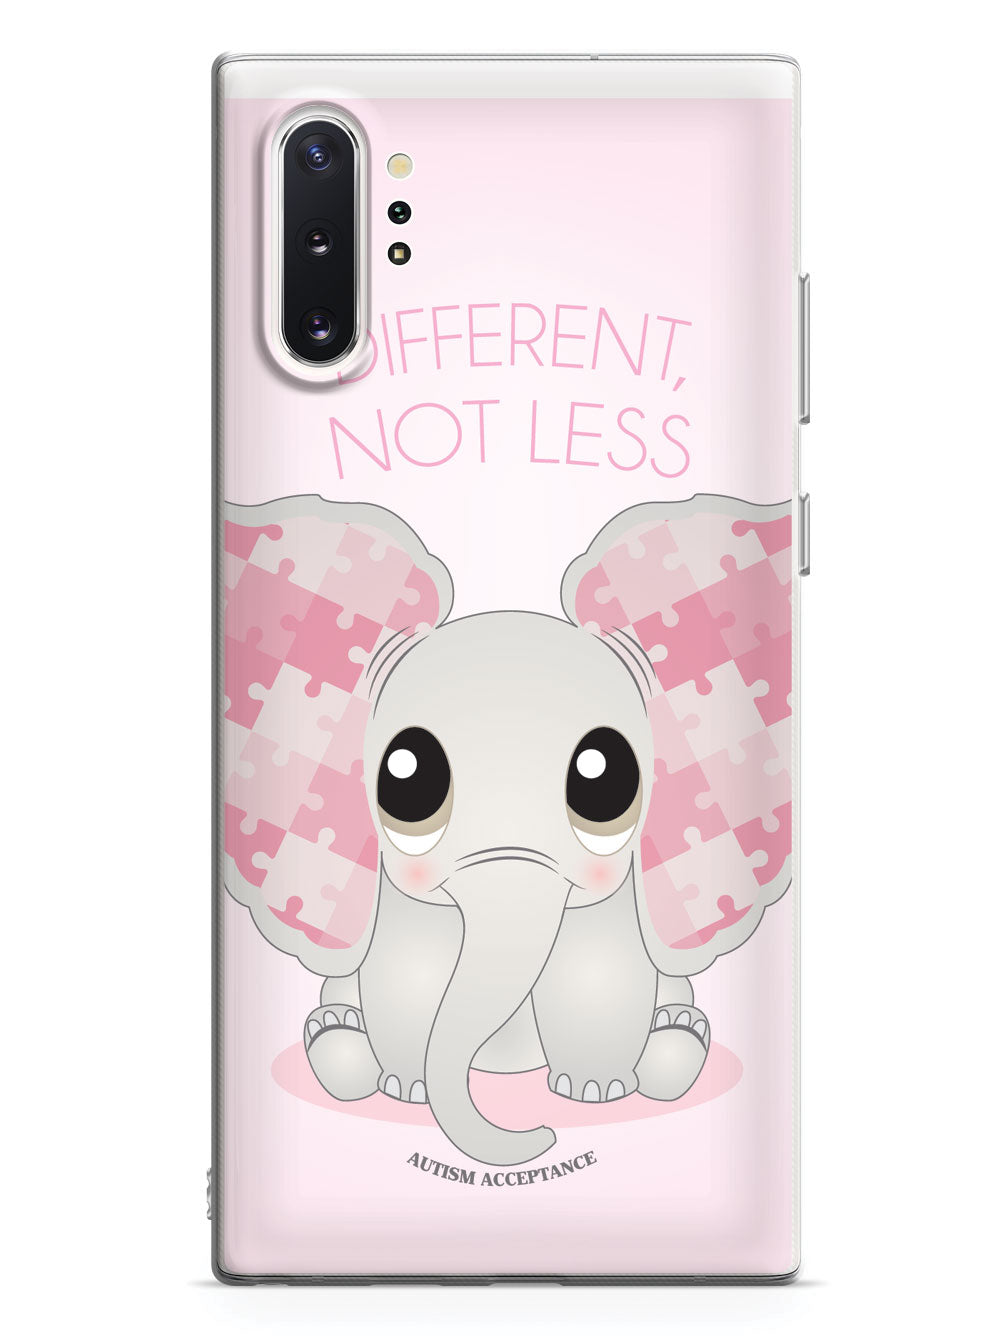 Different, Not Less - Elephant - Autism Awareness Case